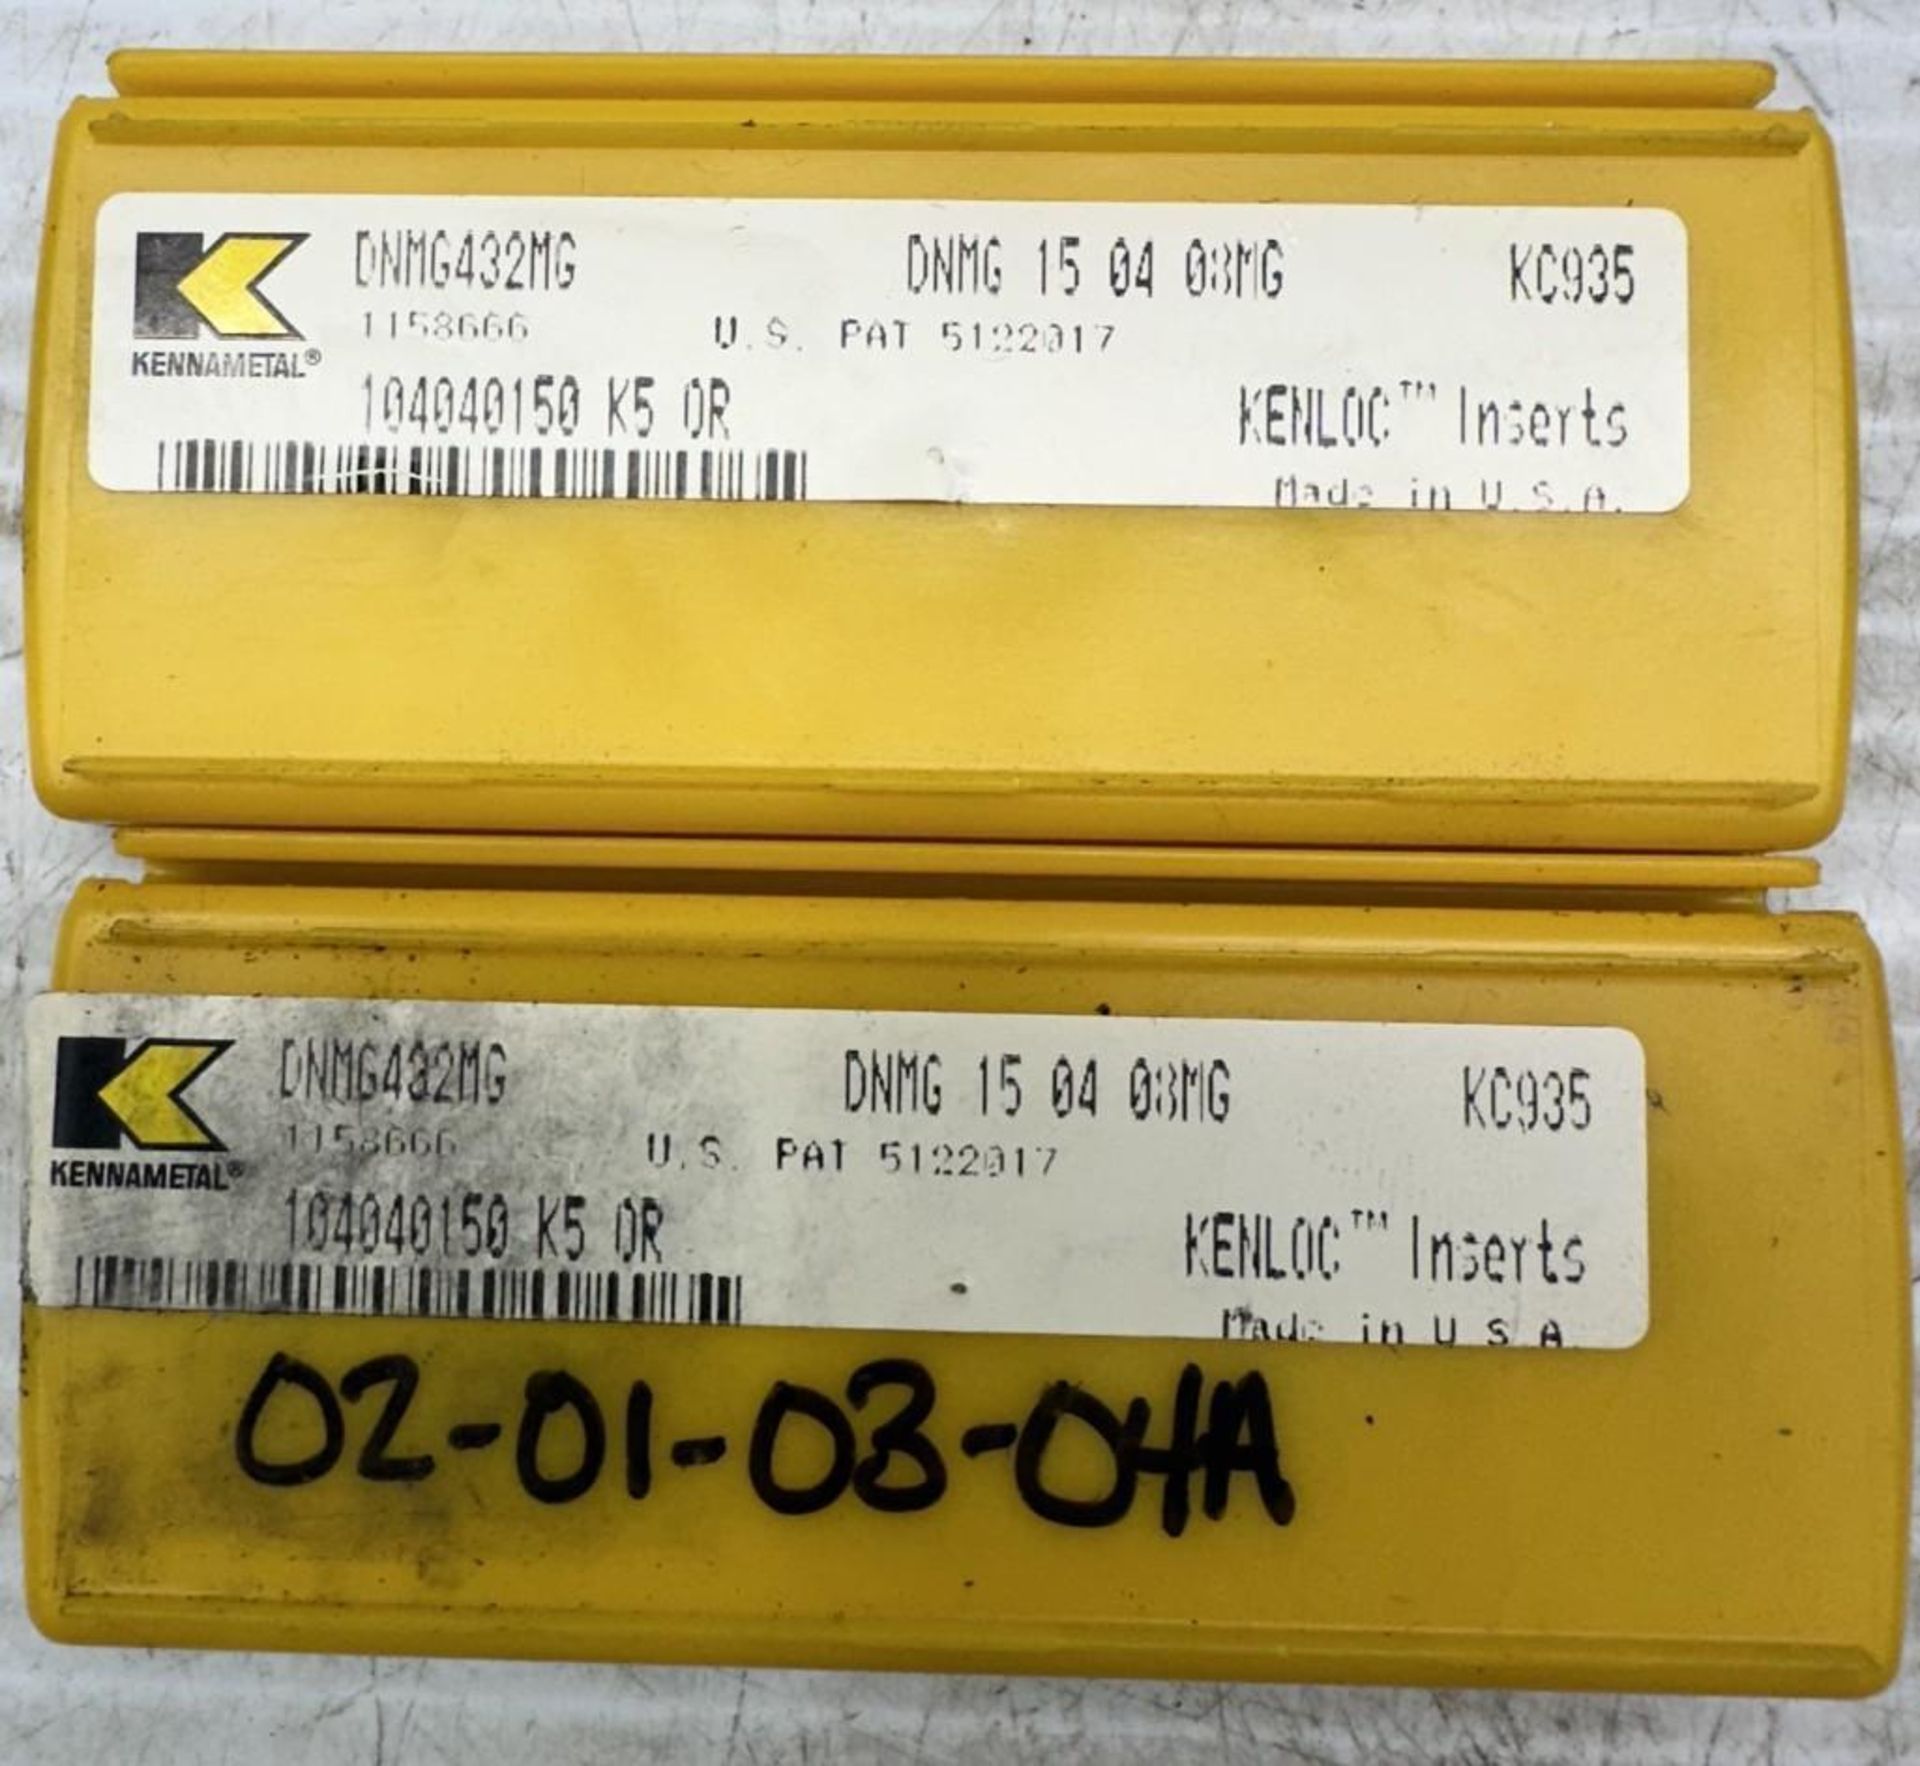 Lot of Kennametal #DNMG432MG Carbide Inserts - Image 2 of 2